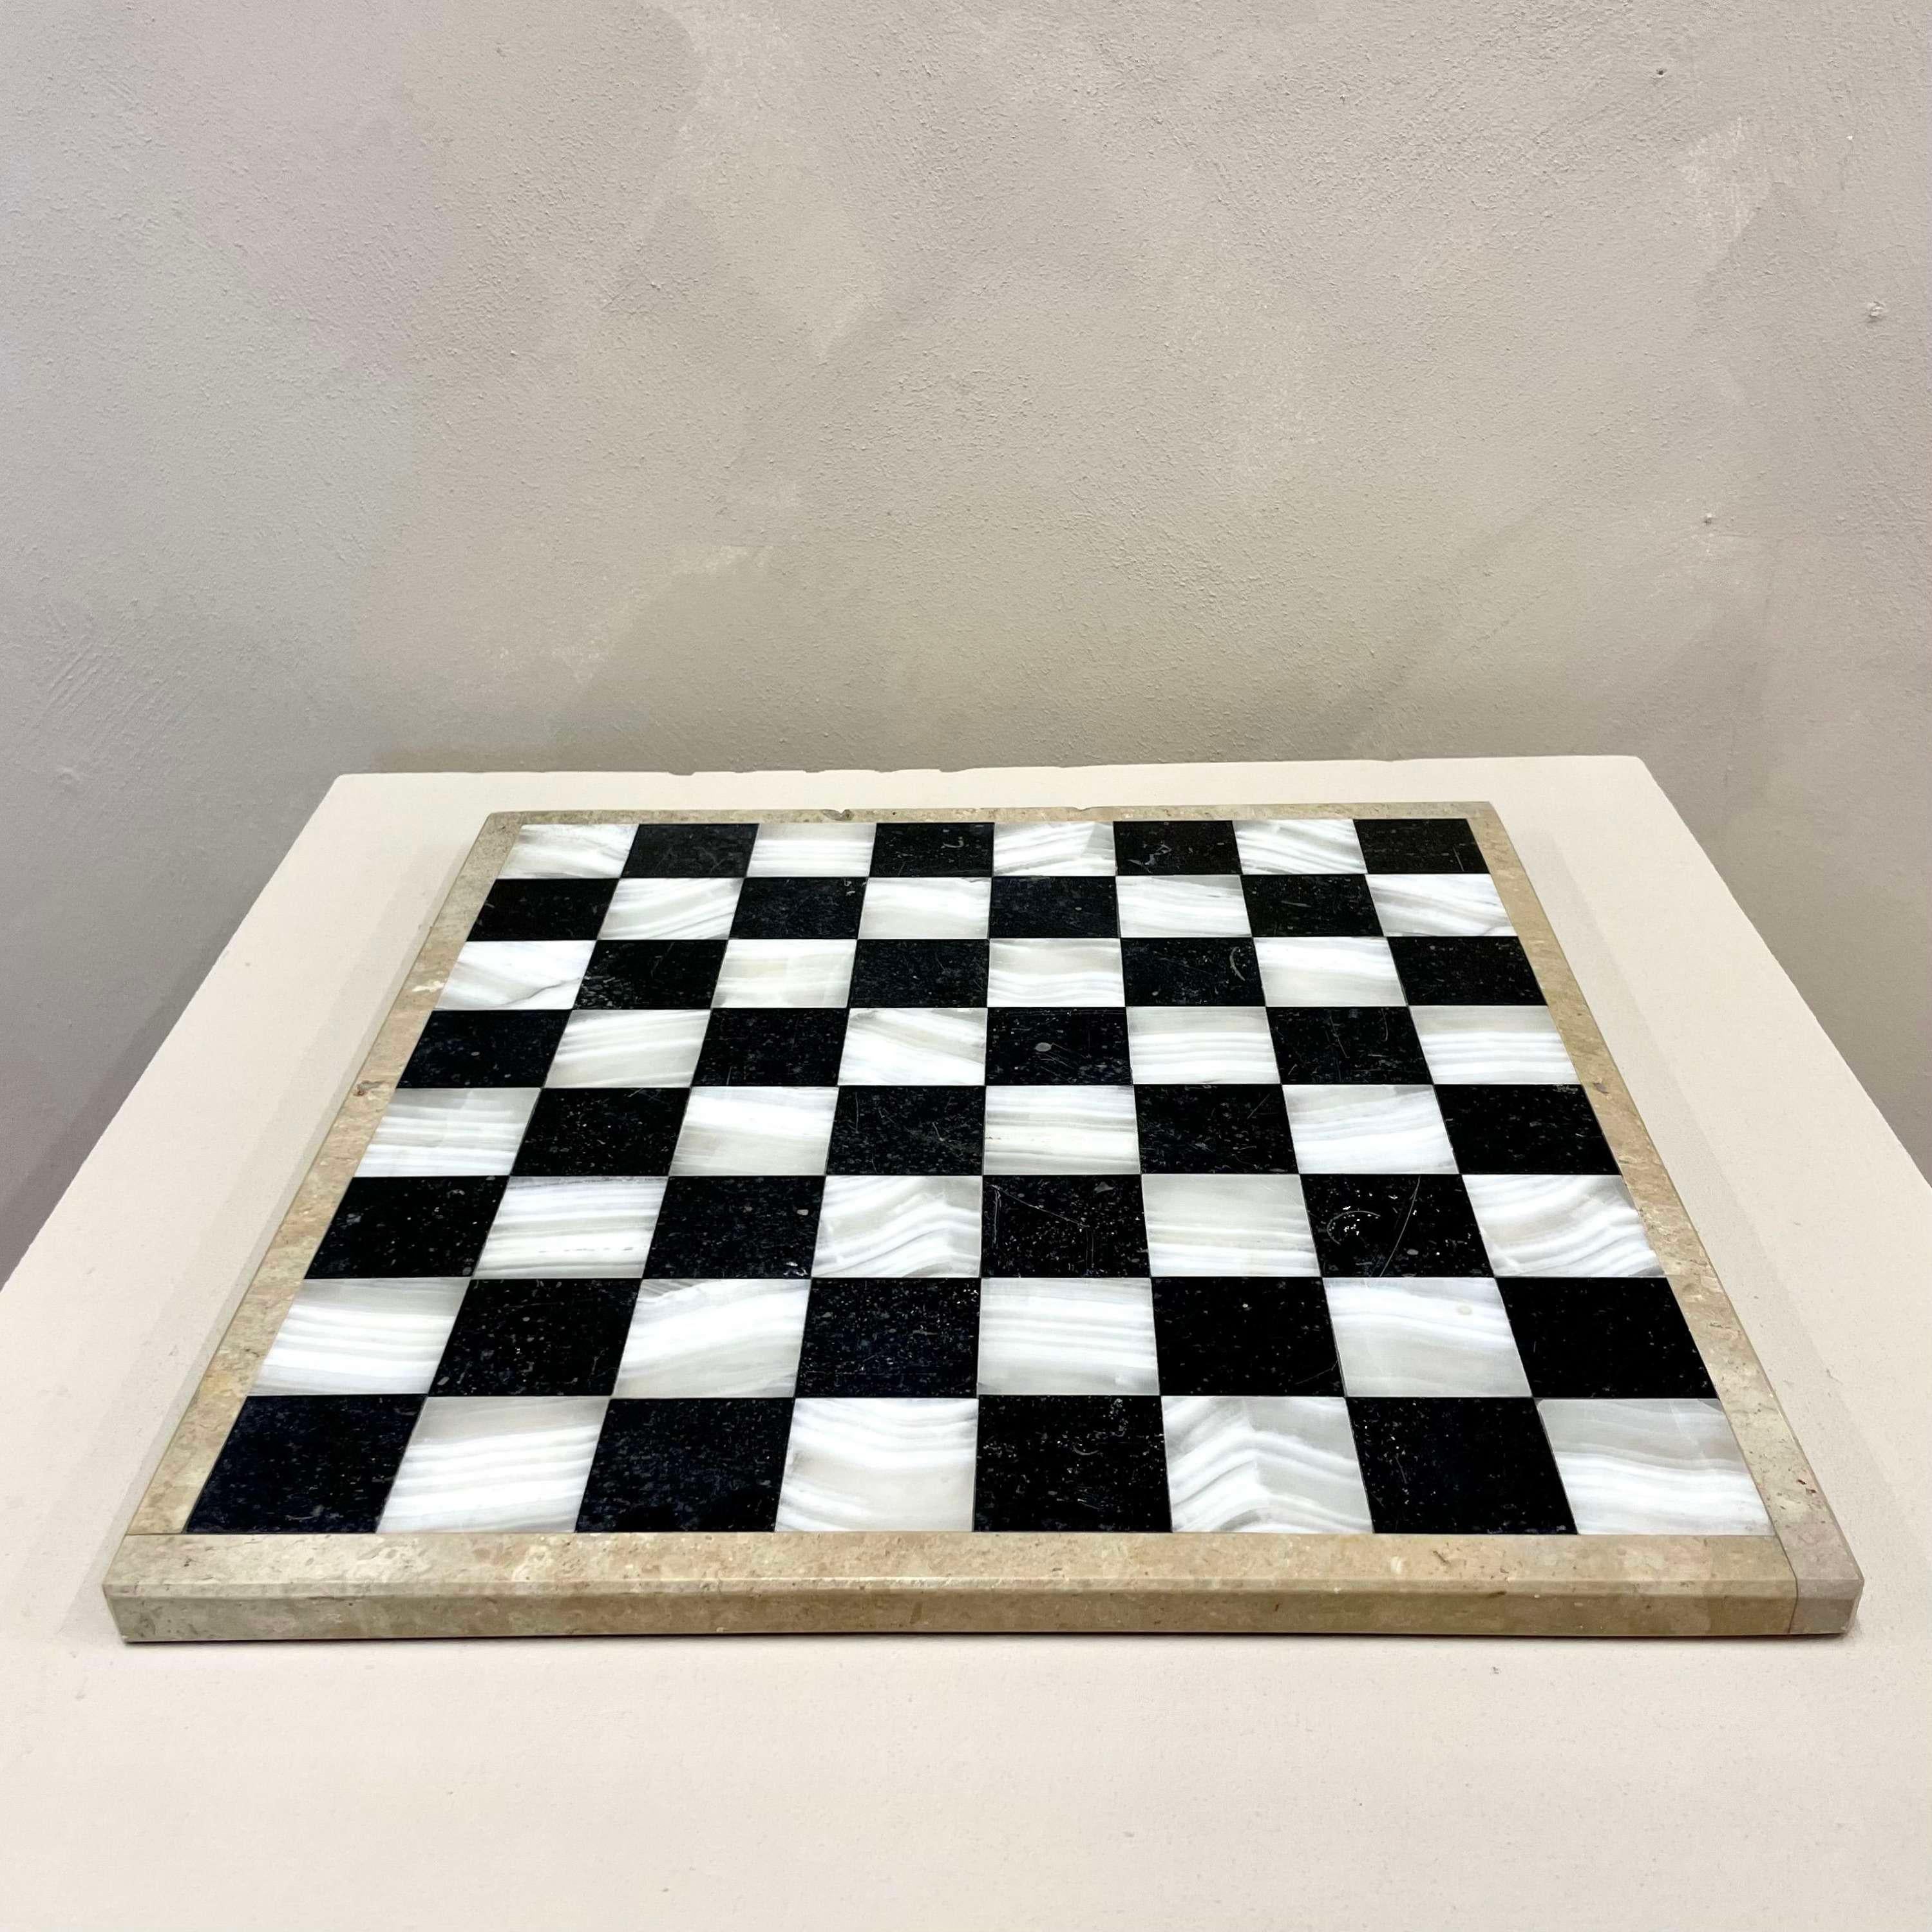 English 19th marble and mother of pearl chess board.
This would make a great focal piece on a footstool with decorative items placed on it 

35.5 cm x 35.5 cm
Height 1.5 cm
We are happy to work with you with your choice of shipping 
or we can